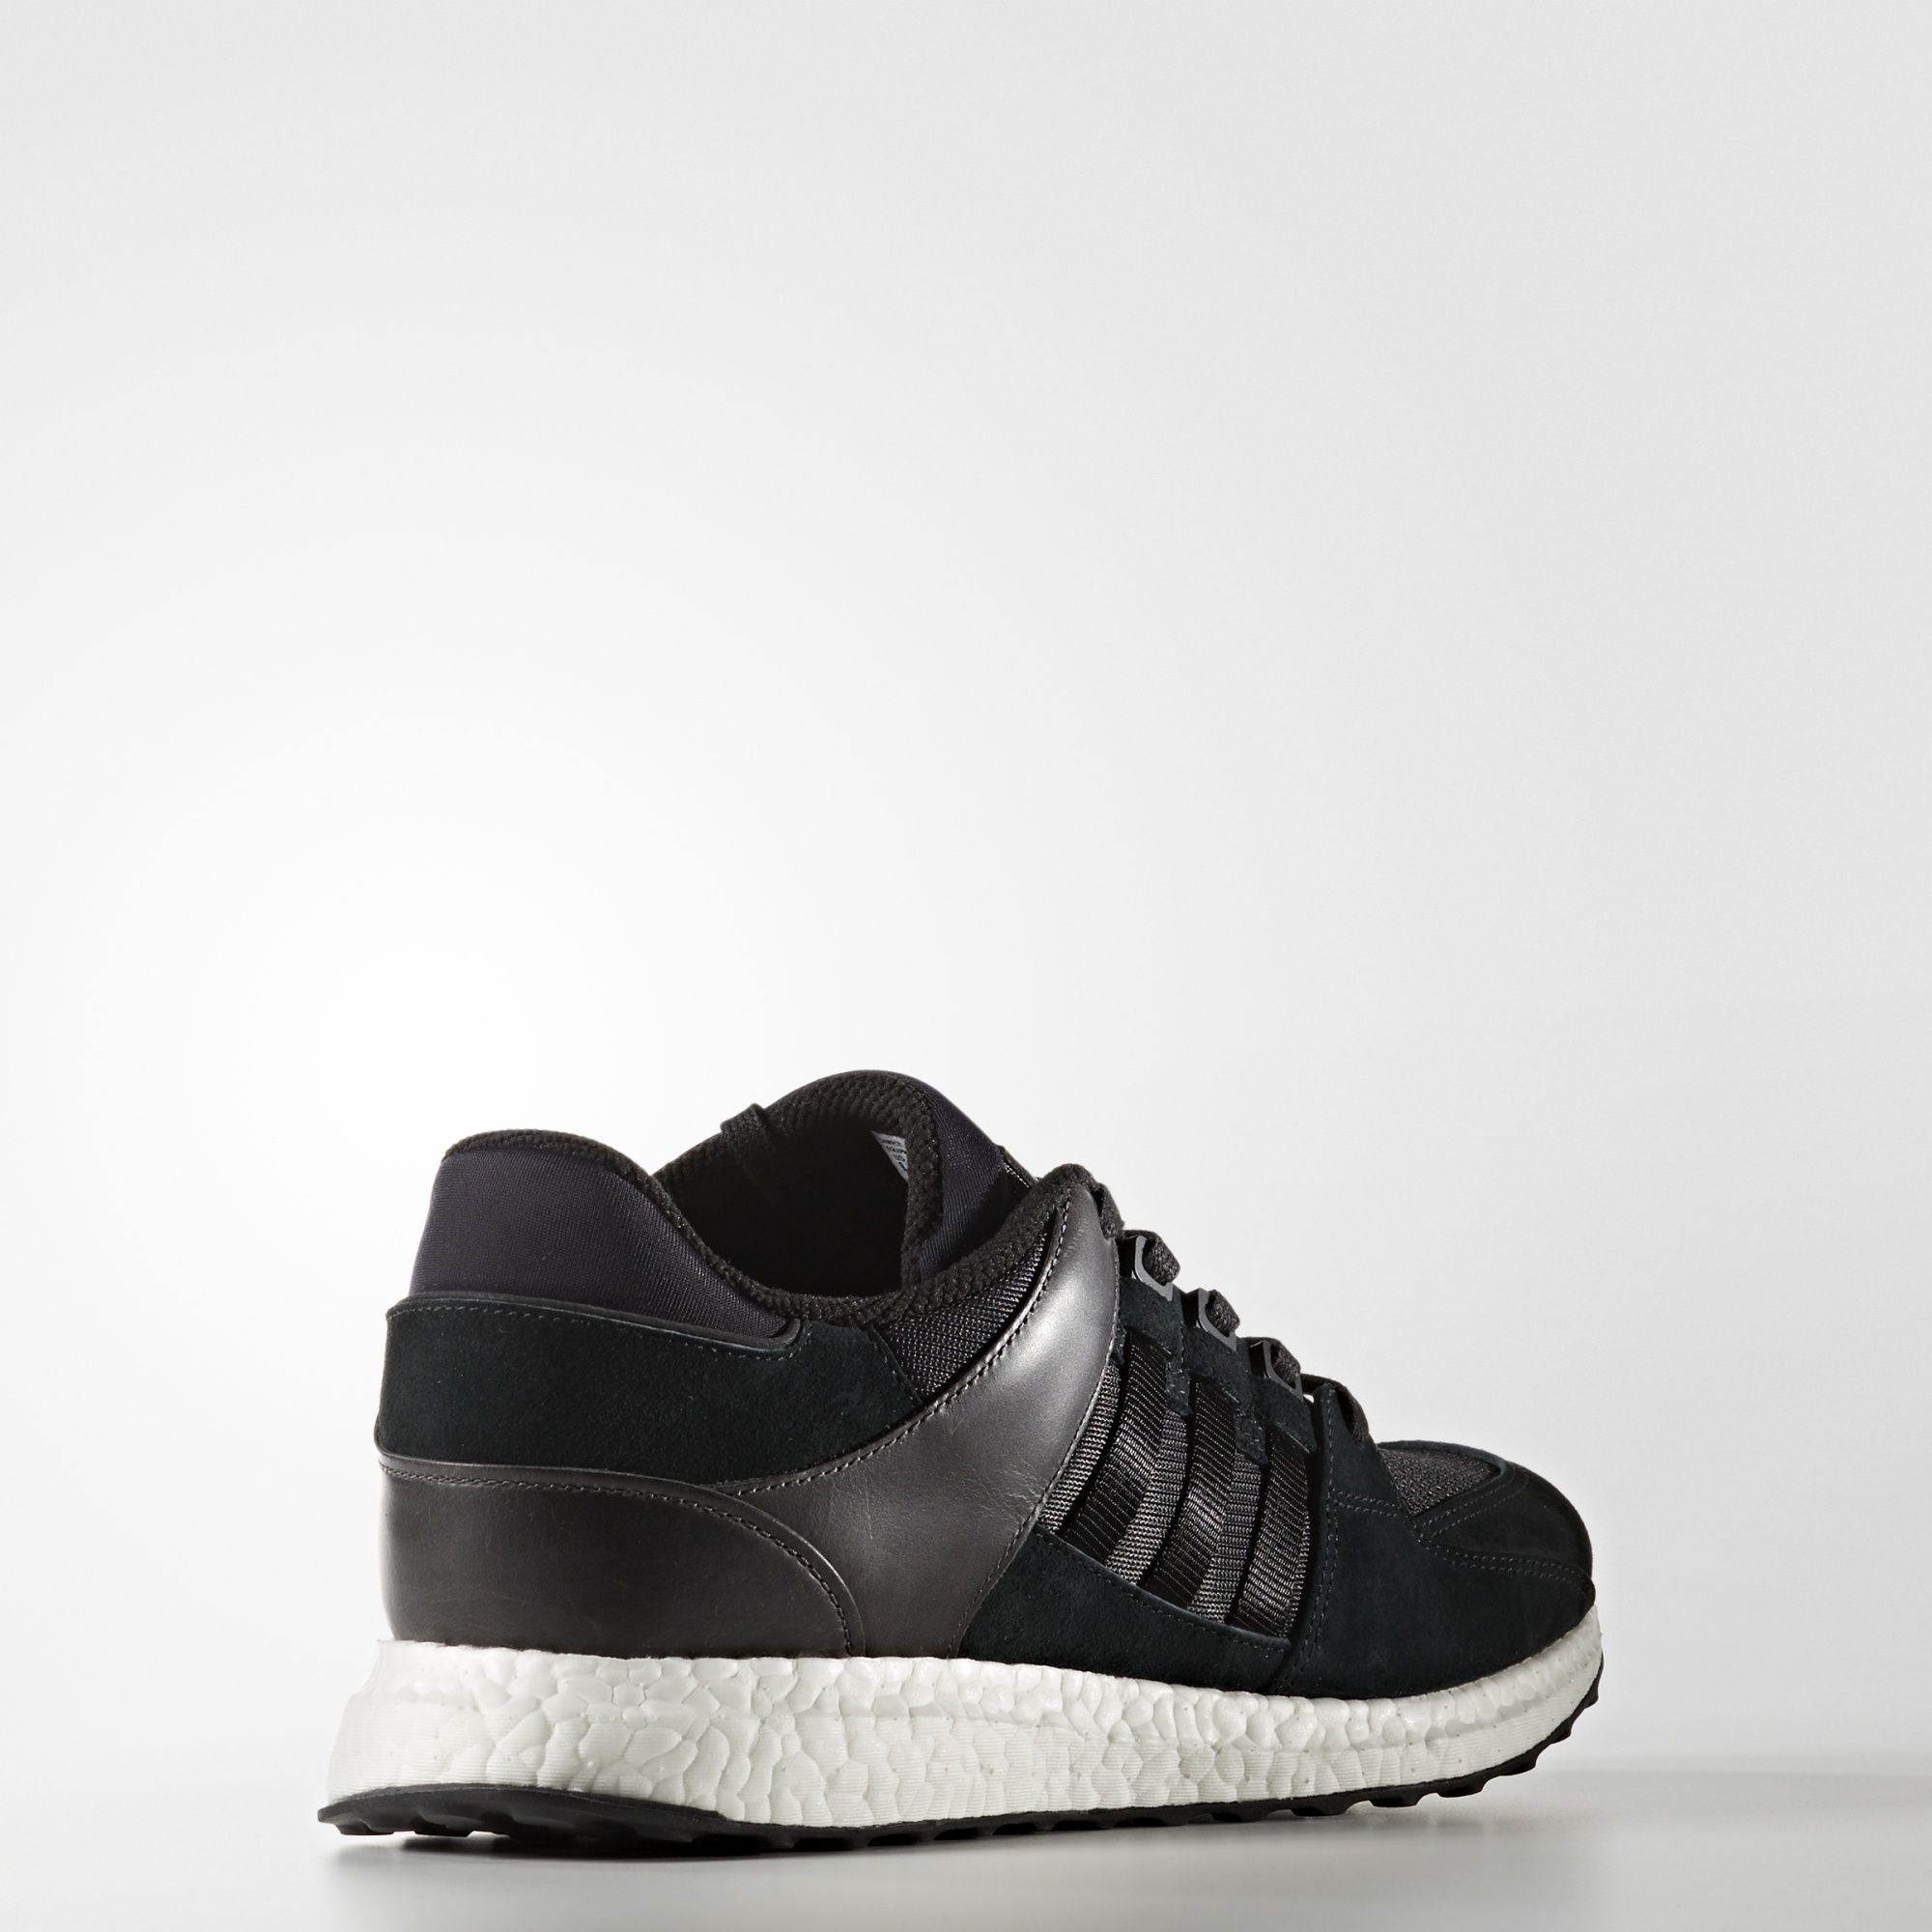 Adidas EQT Support Ultra
Core Black / Footwear White